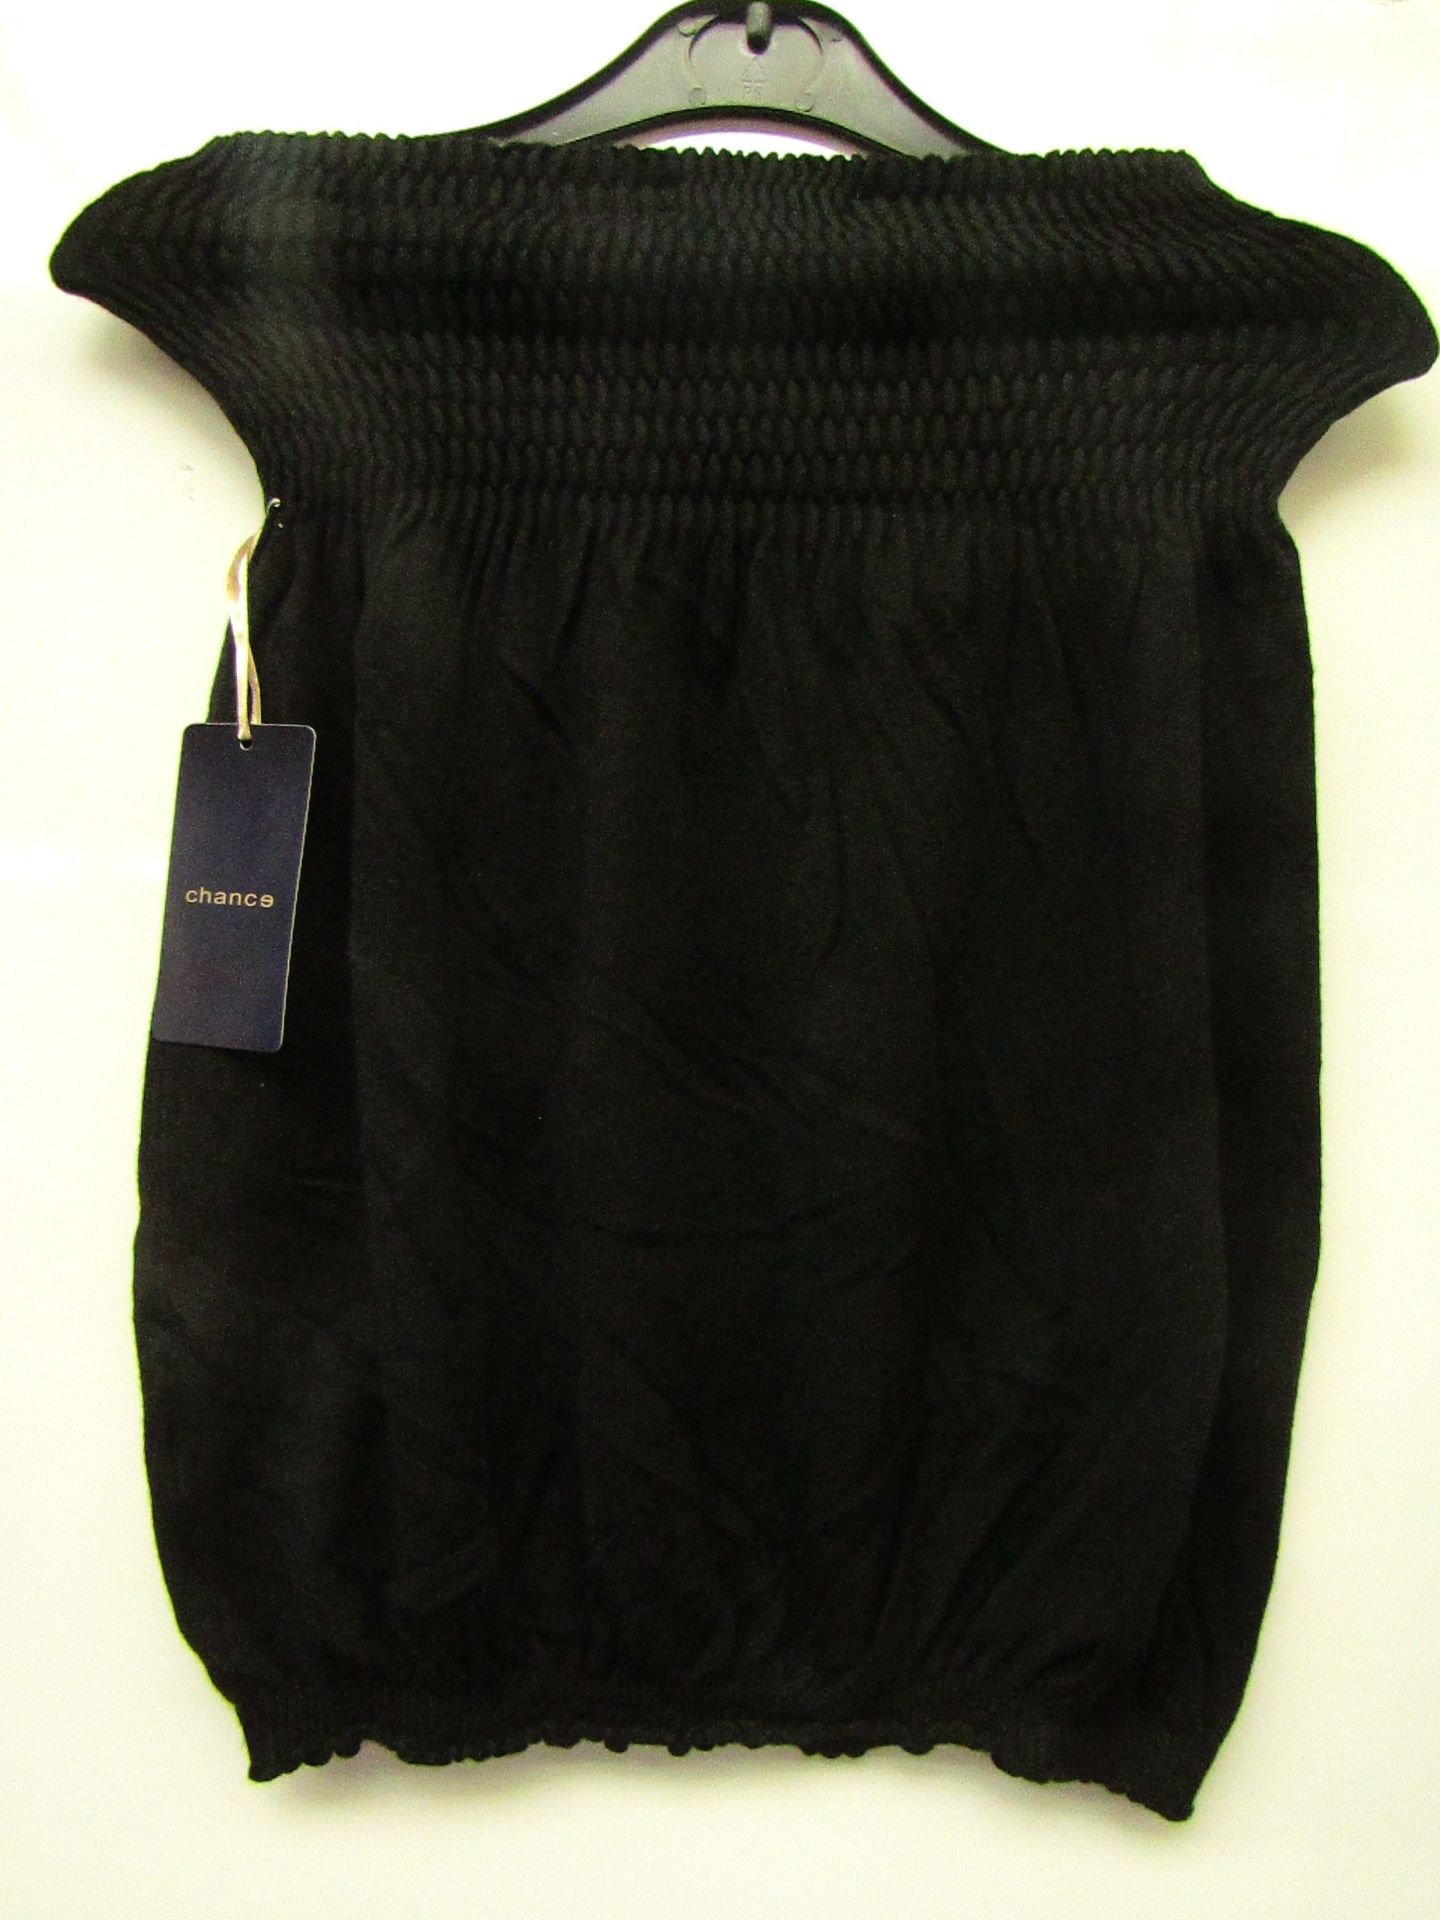 Chances Ladies Green Knitted Strapless Top size M/L new with tag (image shows black for example